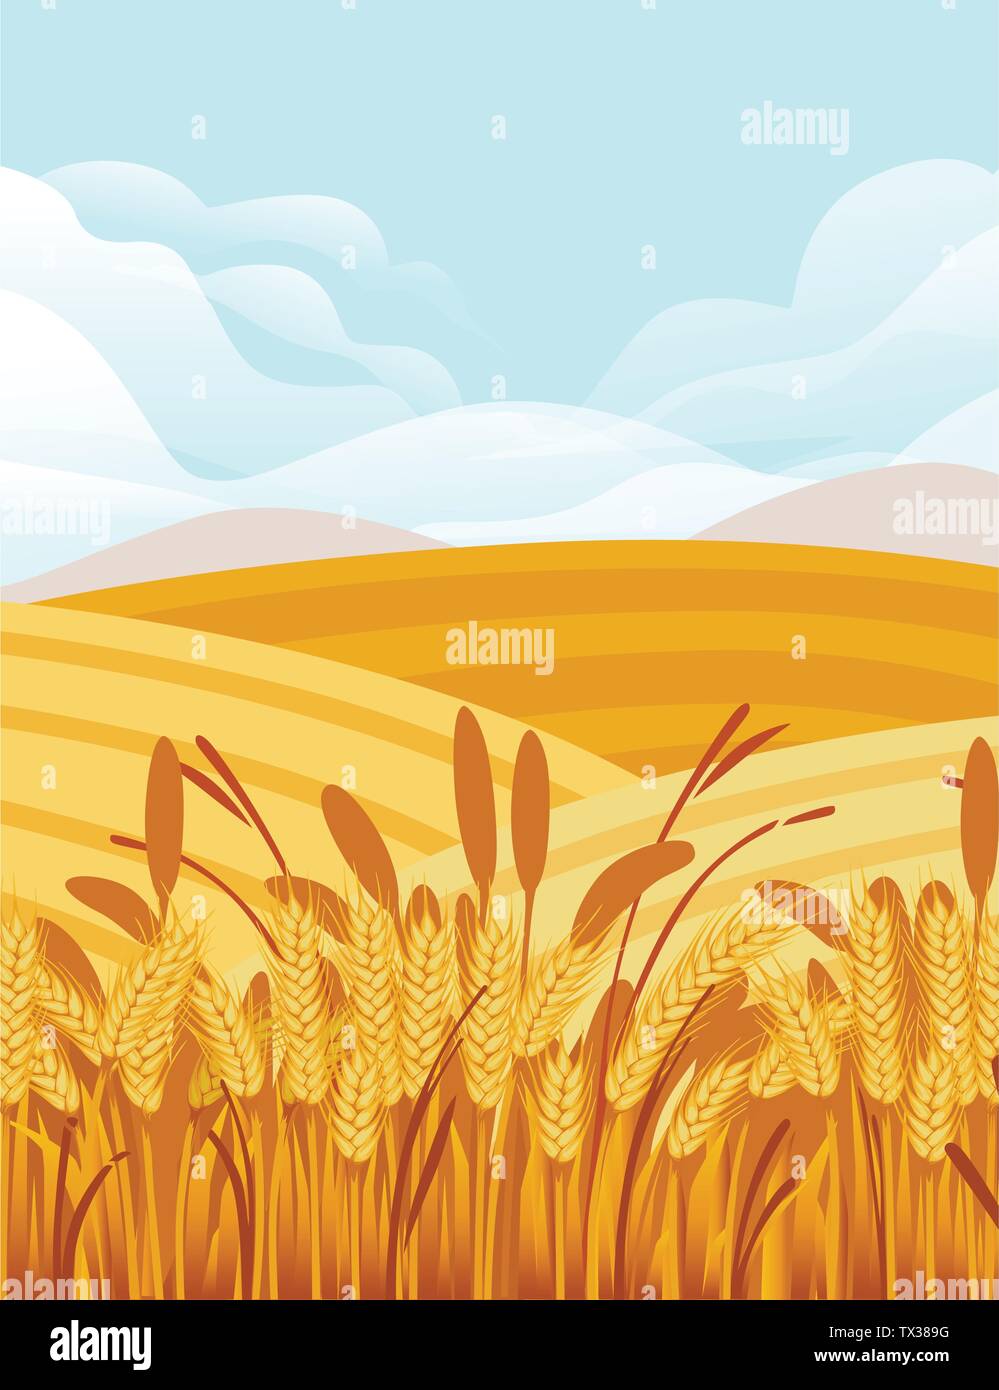 Wheat field illustration with rural landscape and good sunny day on background vertical banner design Stock Vector